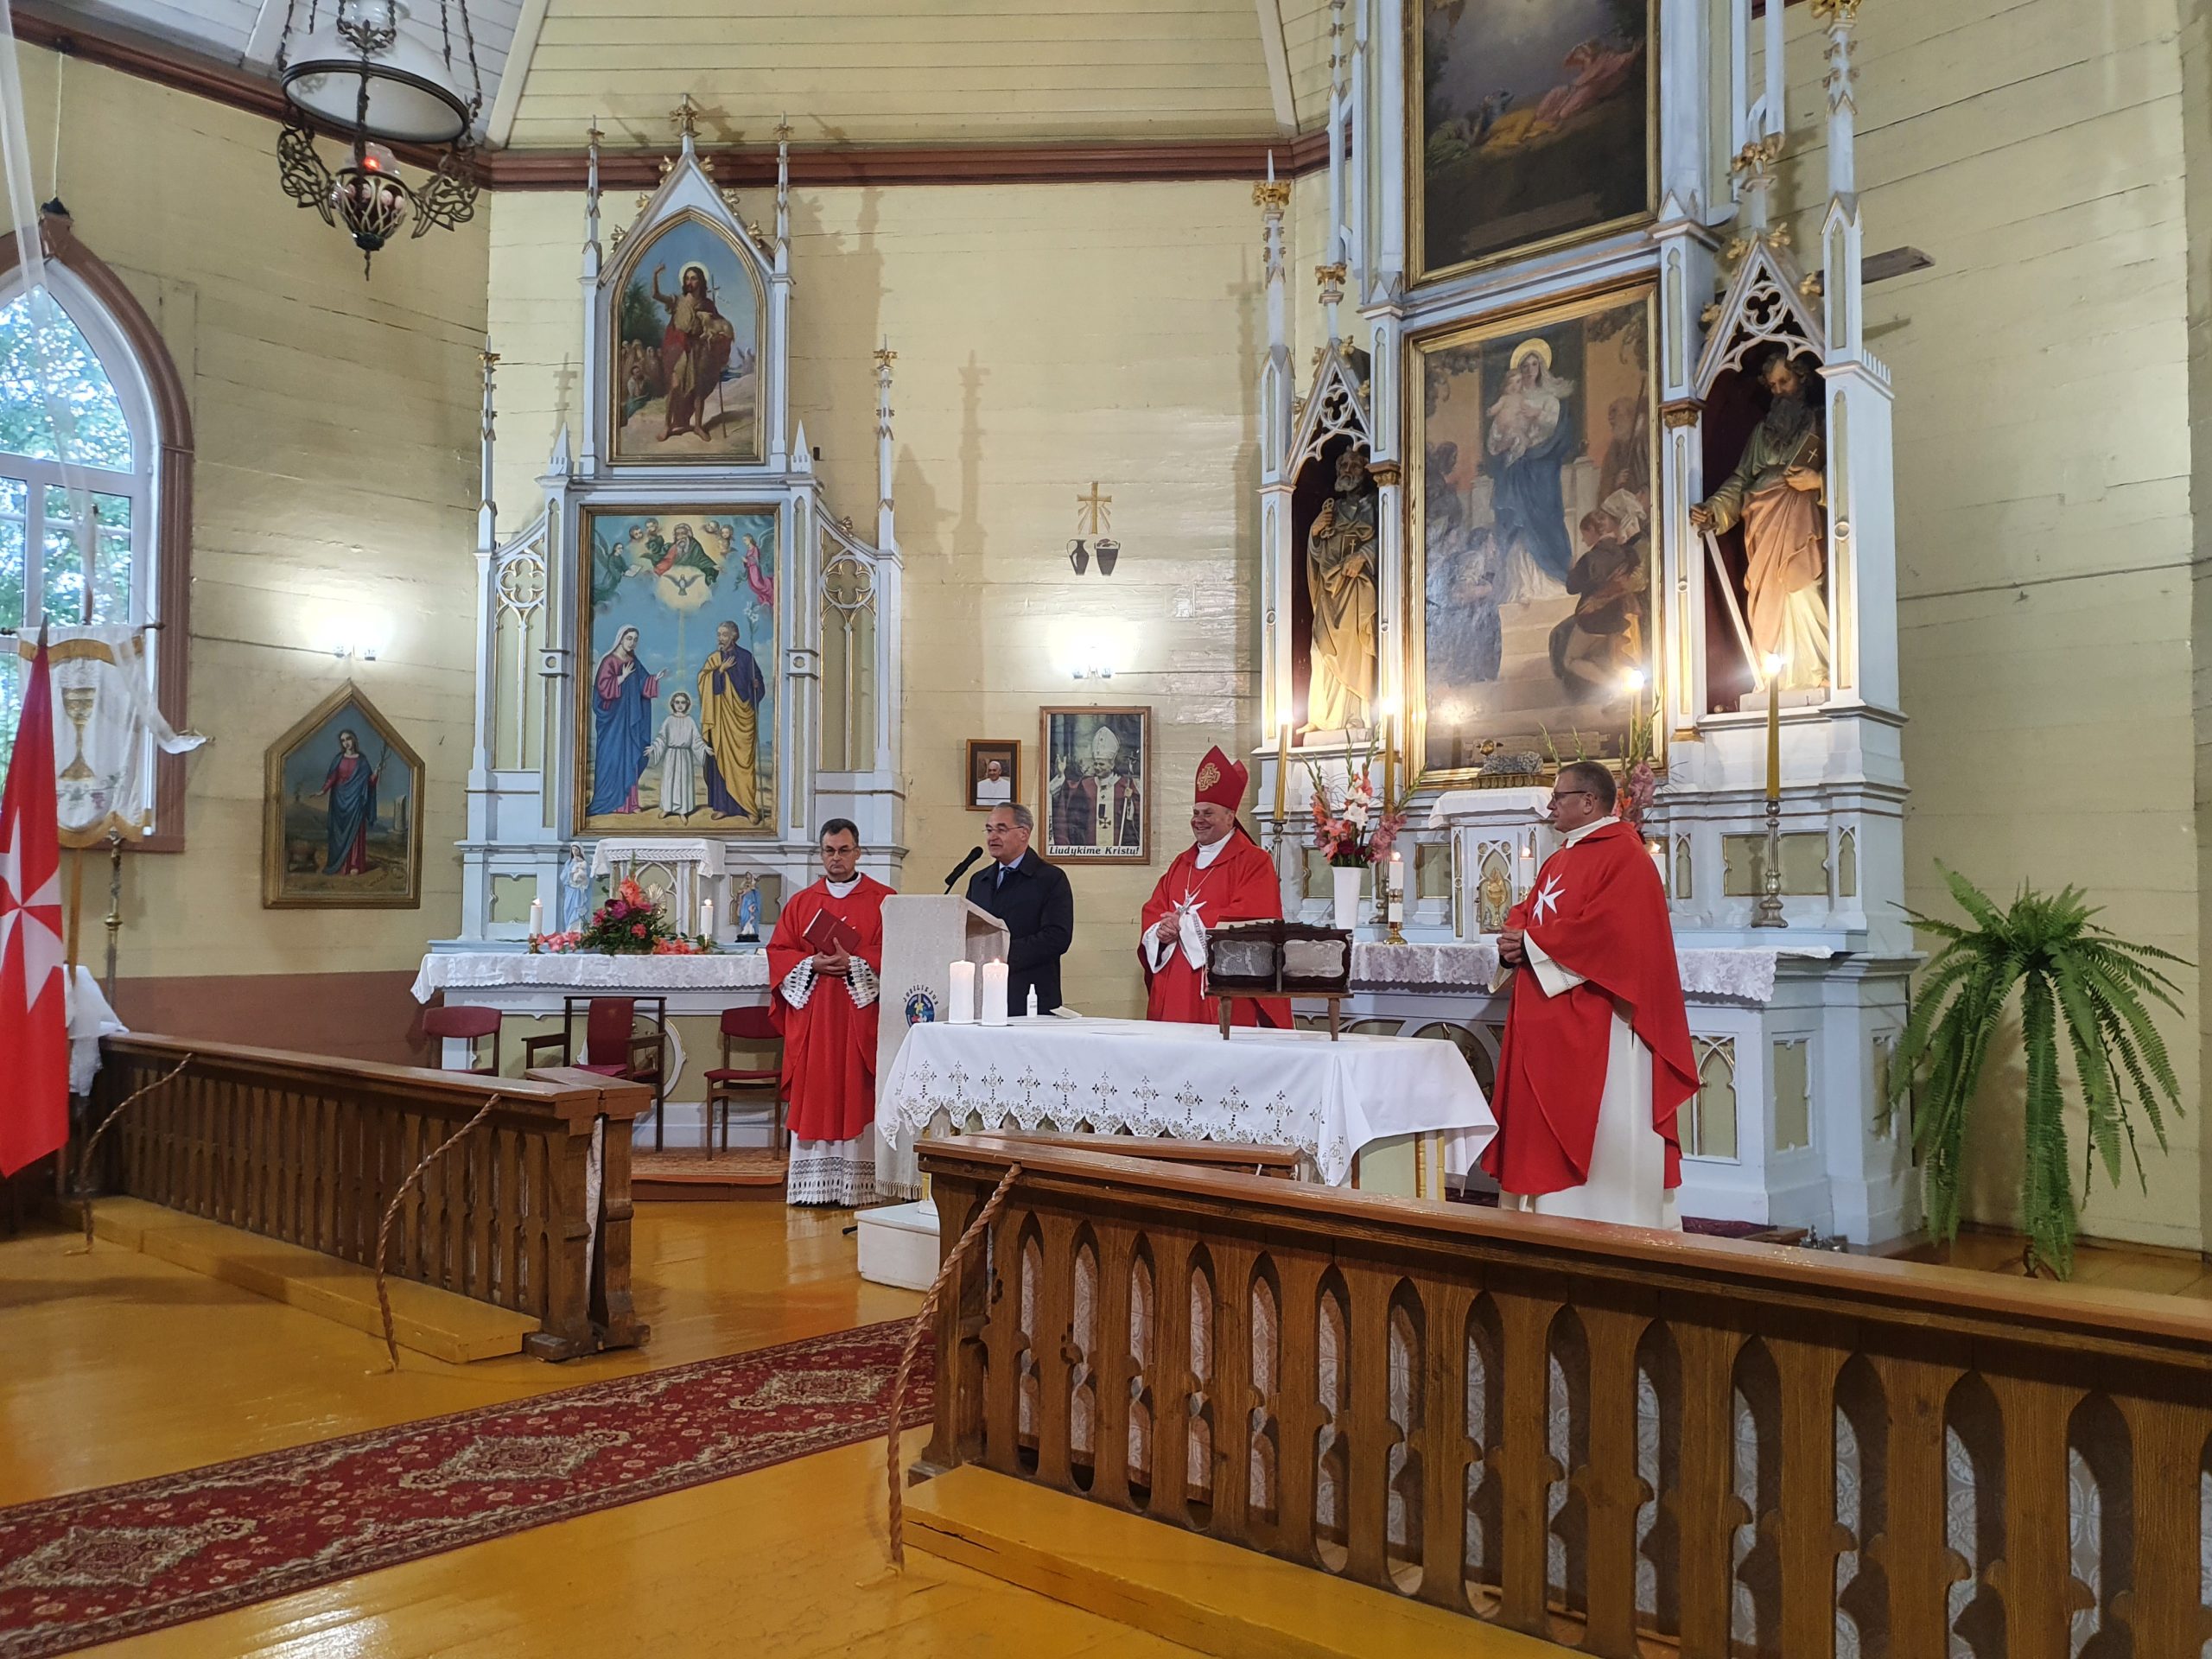 The Order of Malta’s Relief Organisation in Lithuania celebrates 30 years of activities in the presence of the Grand Hospitaller